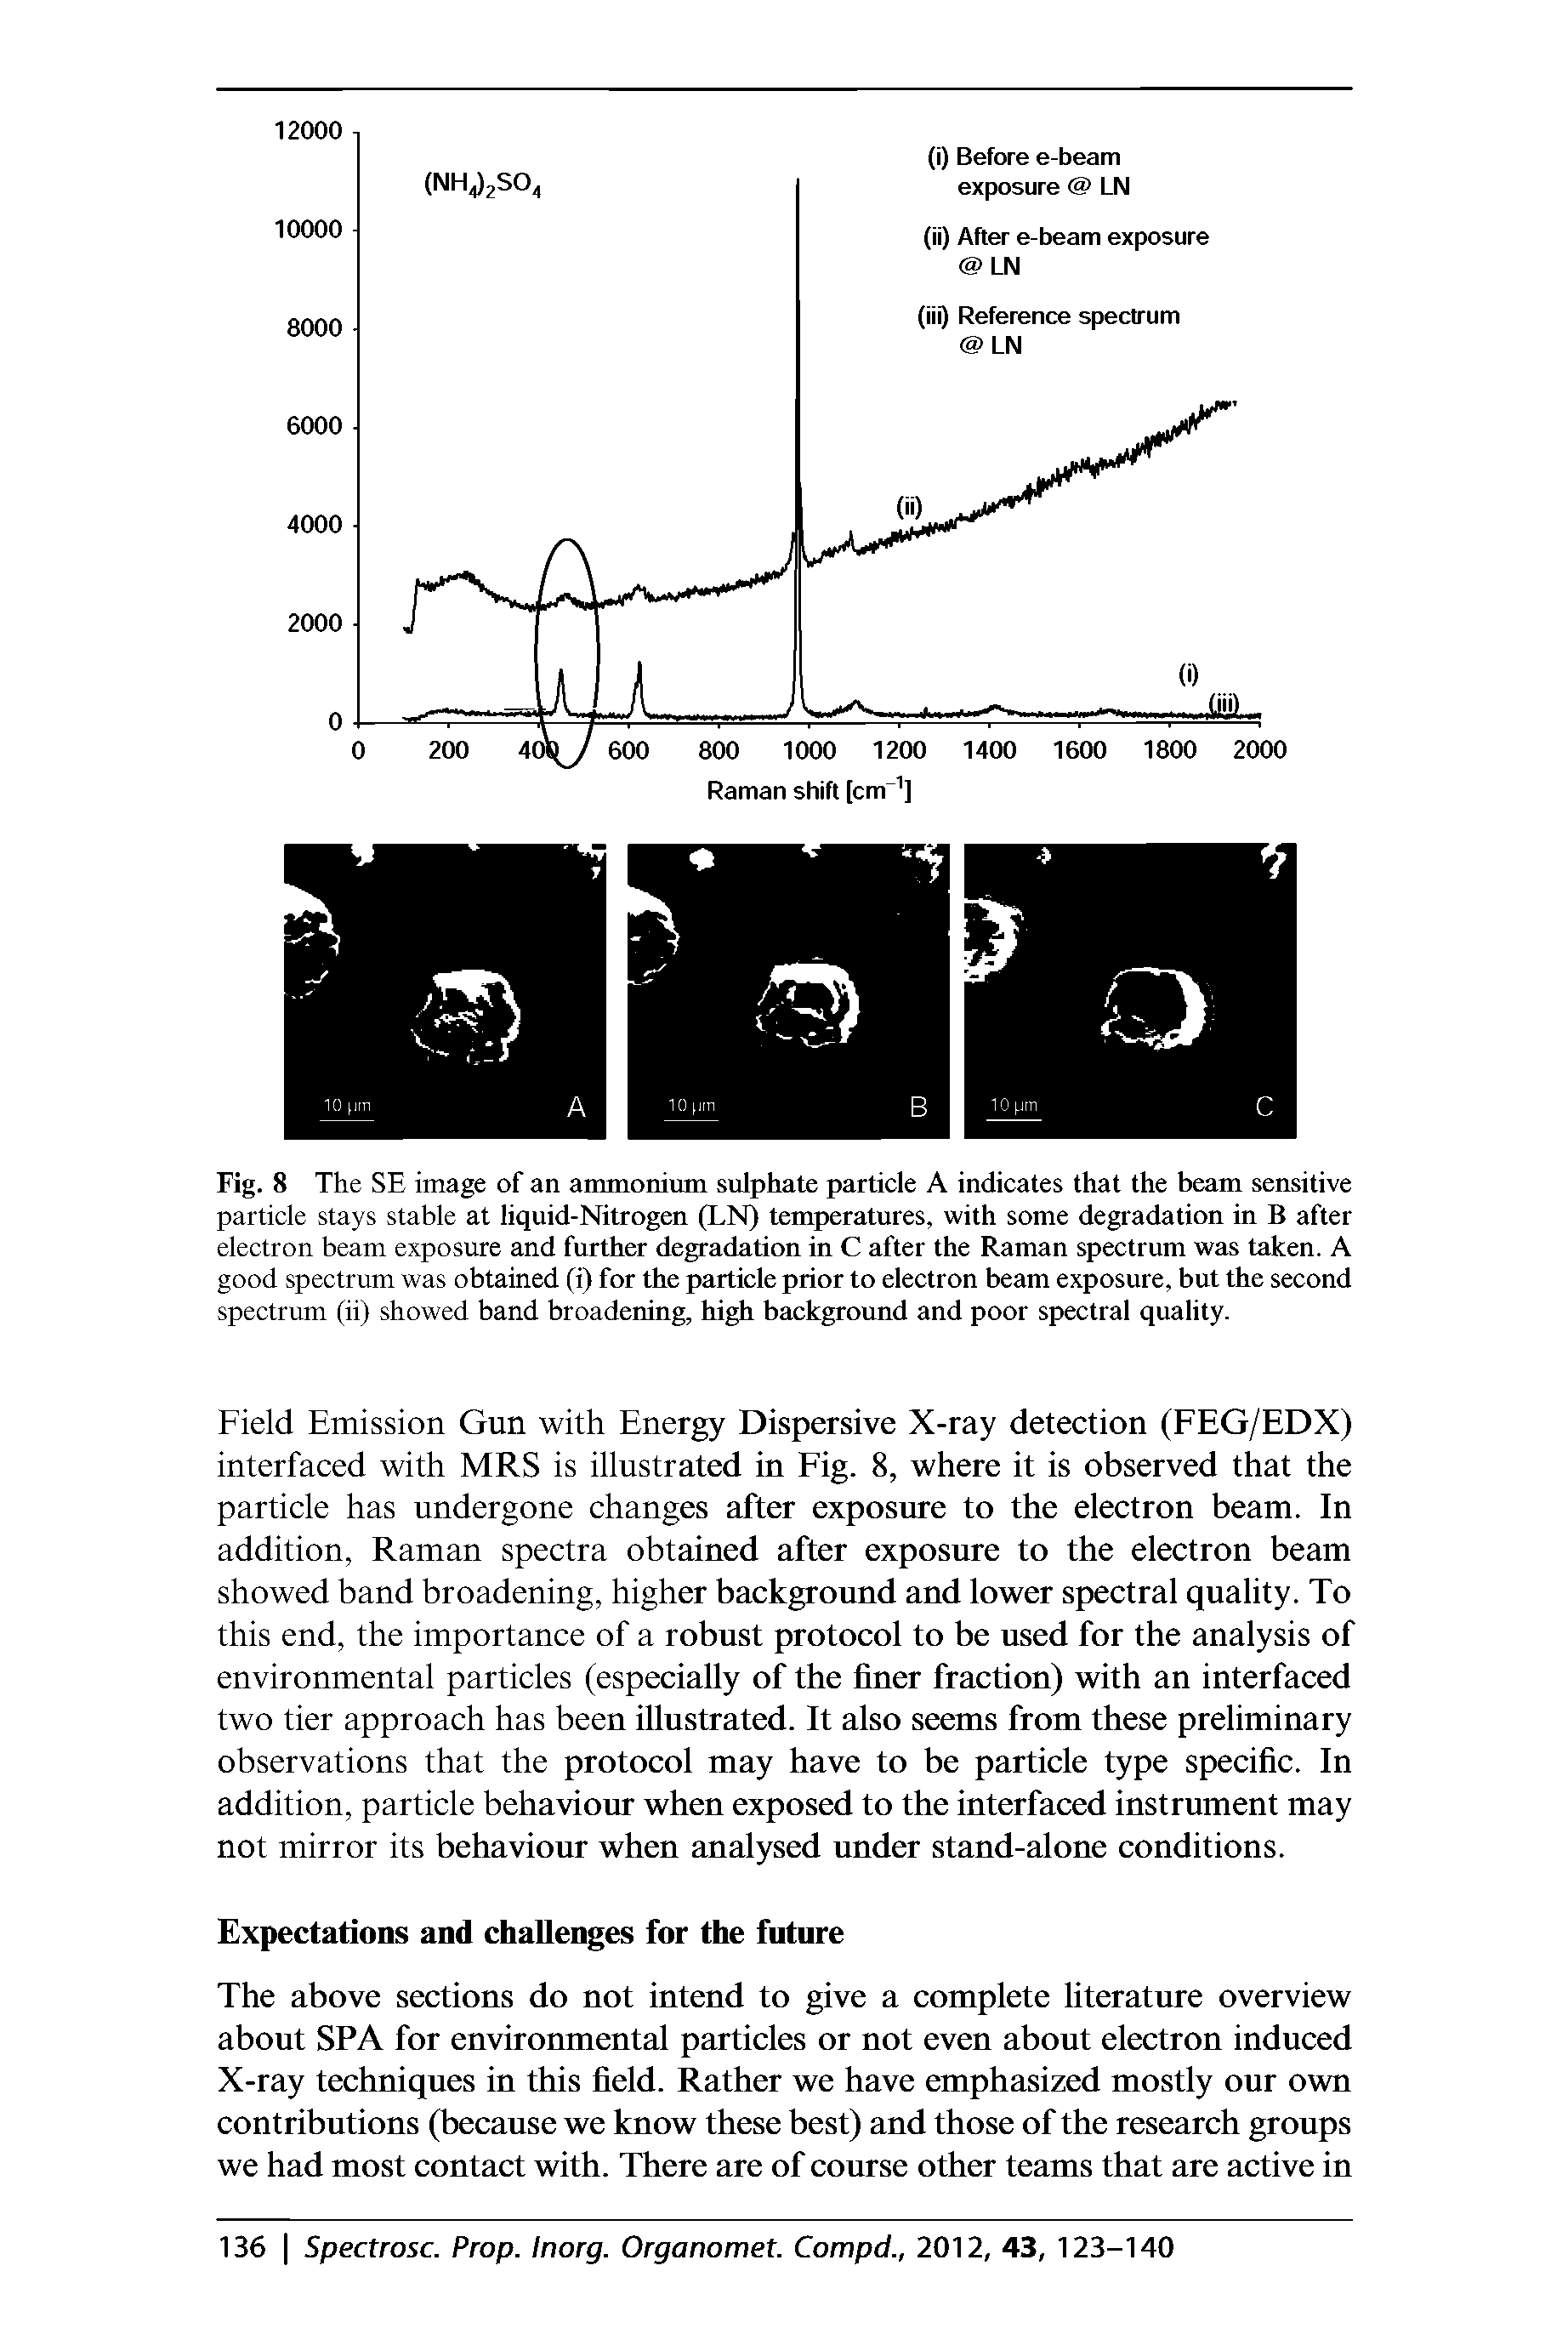 Fig. 8 The SE image of an ammonium sulphate particle A indicates that the beam sensitive particle stays stable at liquid-Nitrogen (LN) temperatures, with some degradation in B after electron beam exposure and further degradation in C after the Raman spectrum was taken. A good spectrum was obtained (i) for the particle prior to electron beam exposure, but the second spectrum (ii) showed band broadening, high background and poor spectral quality.